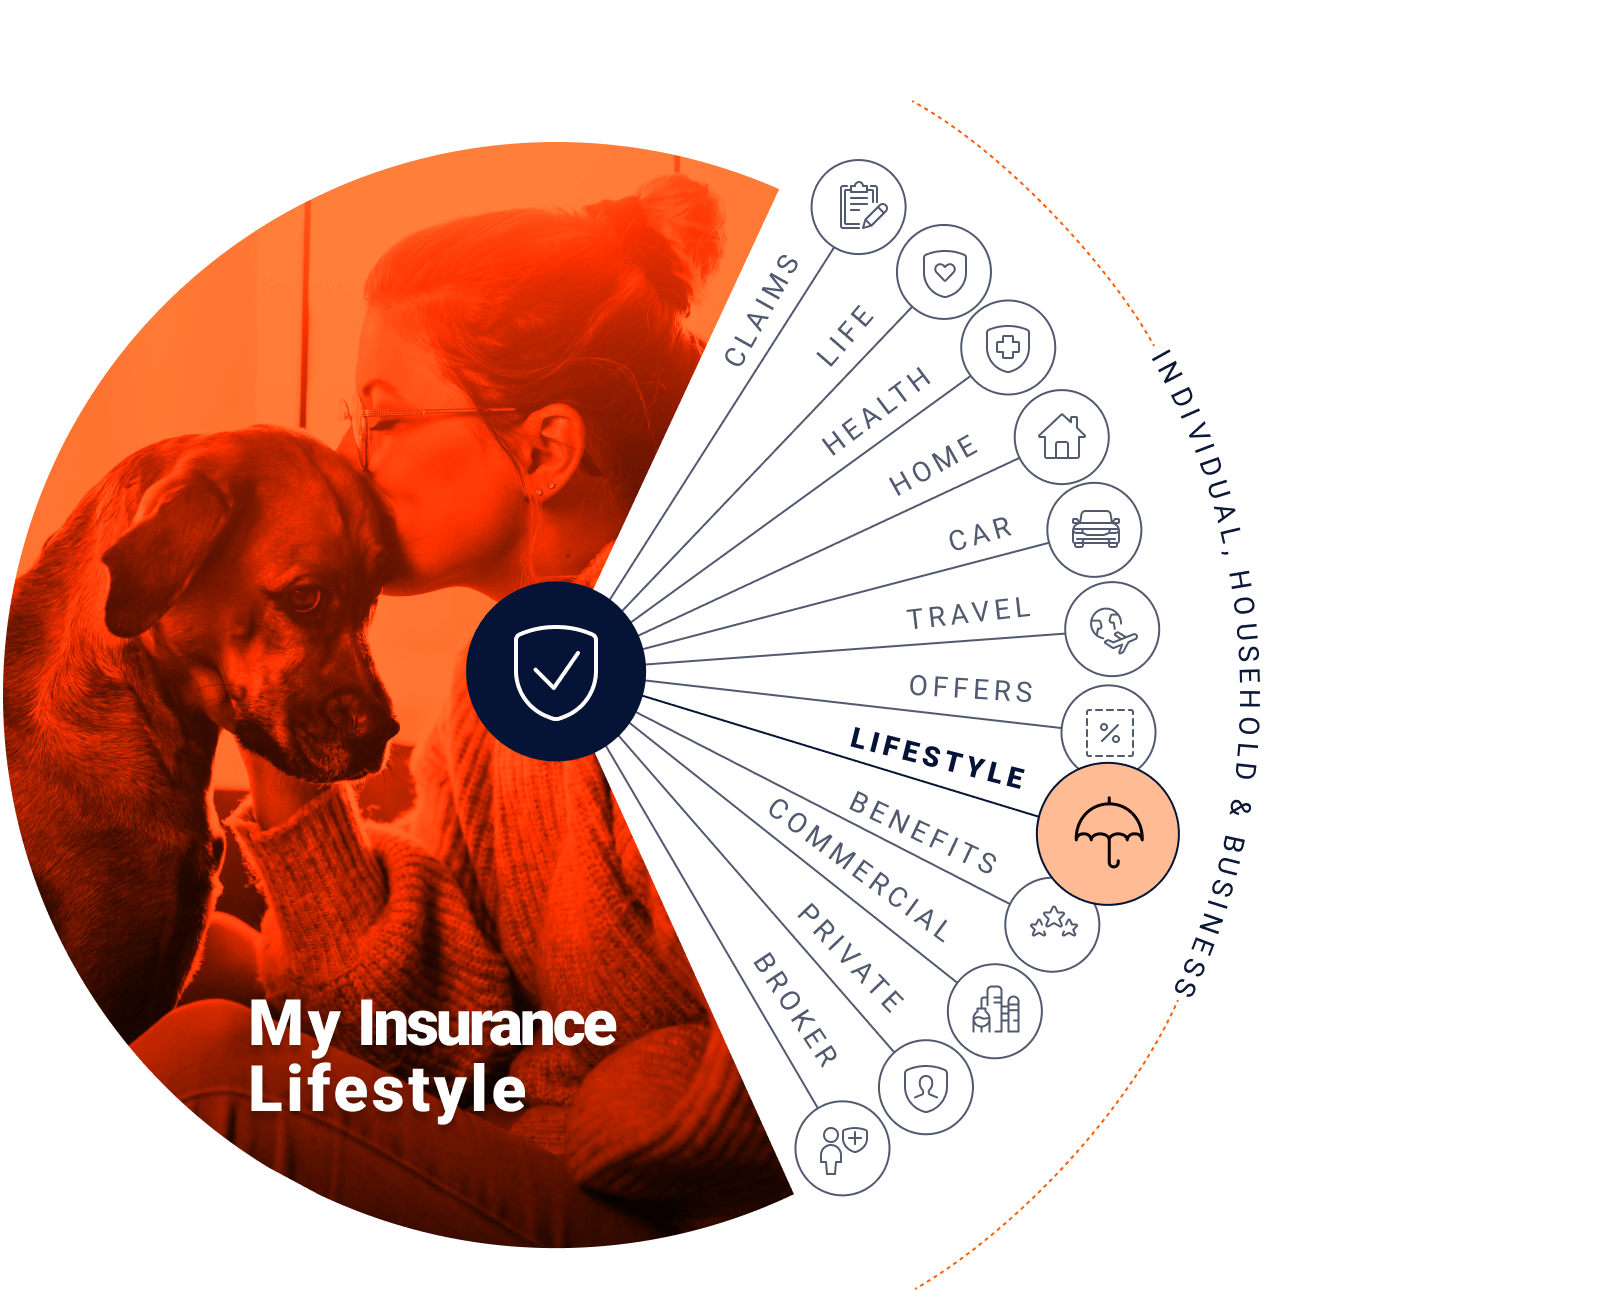 My Insurance lifestyle: Claims, Life, health, home, car, travel, offers, lifestyle, benefits, commercial, Private, and broker